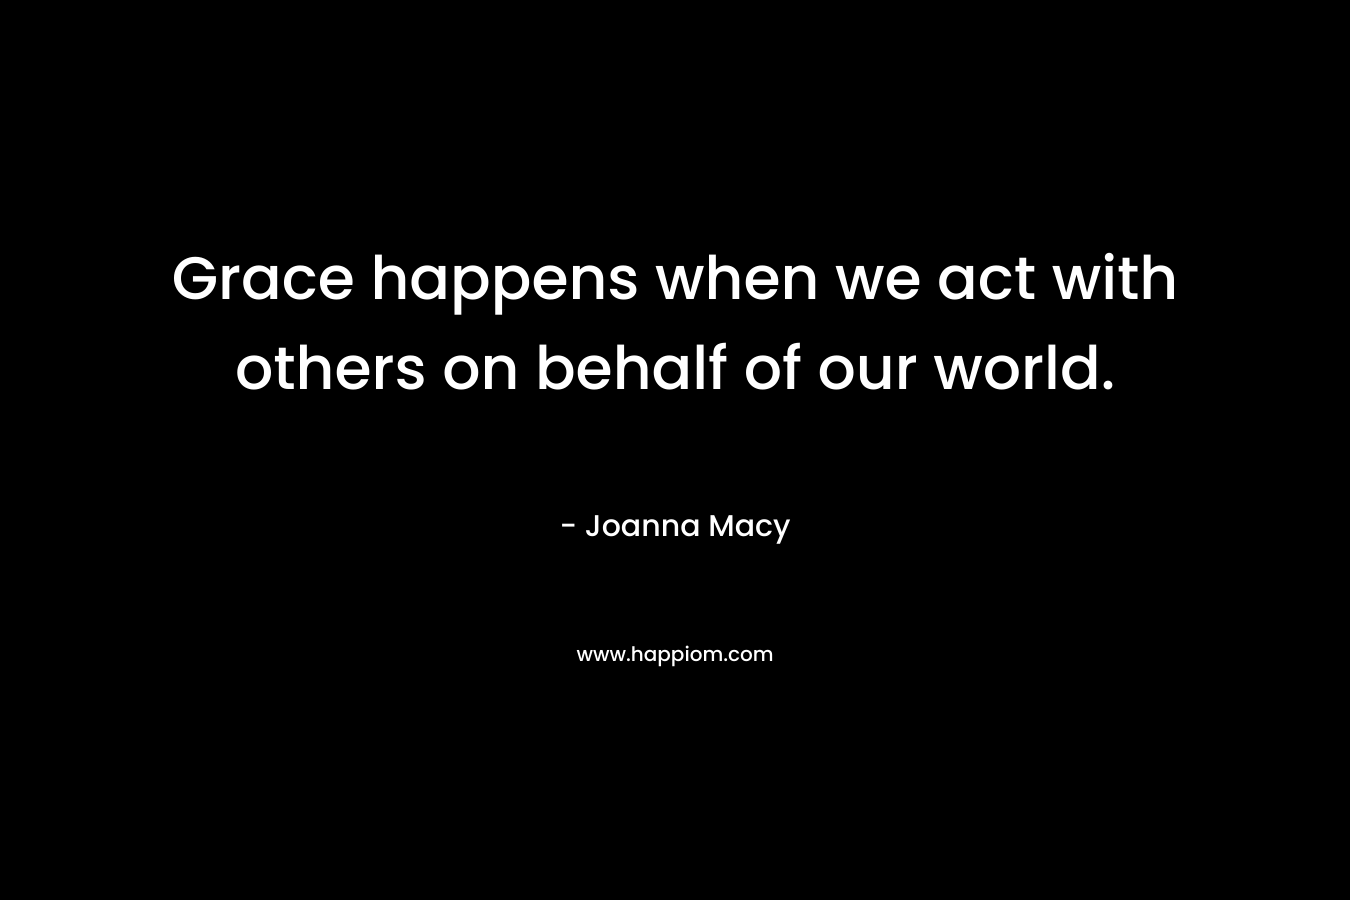 Grace happens when we act with others on behalf of our world. – Joanna Macy